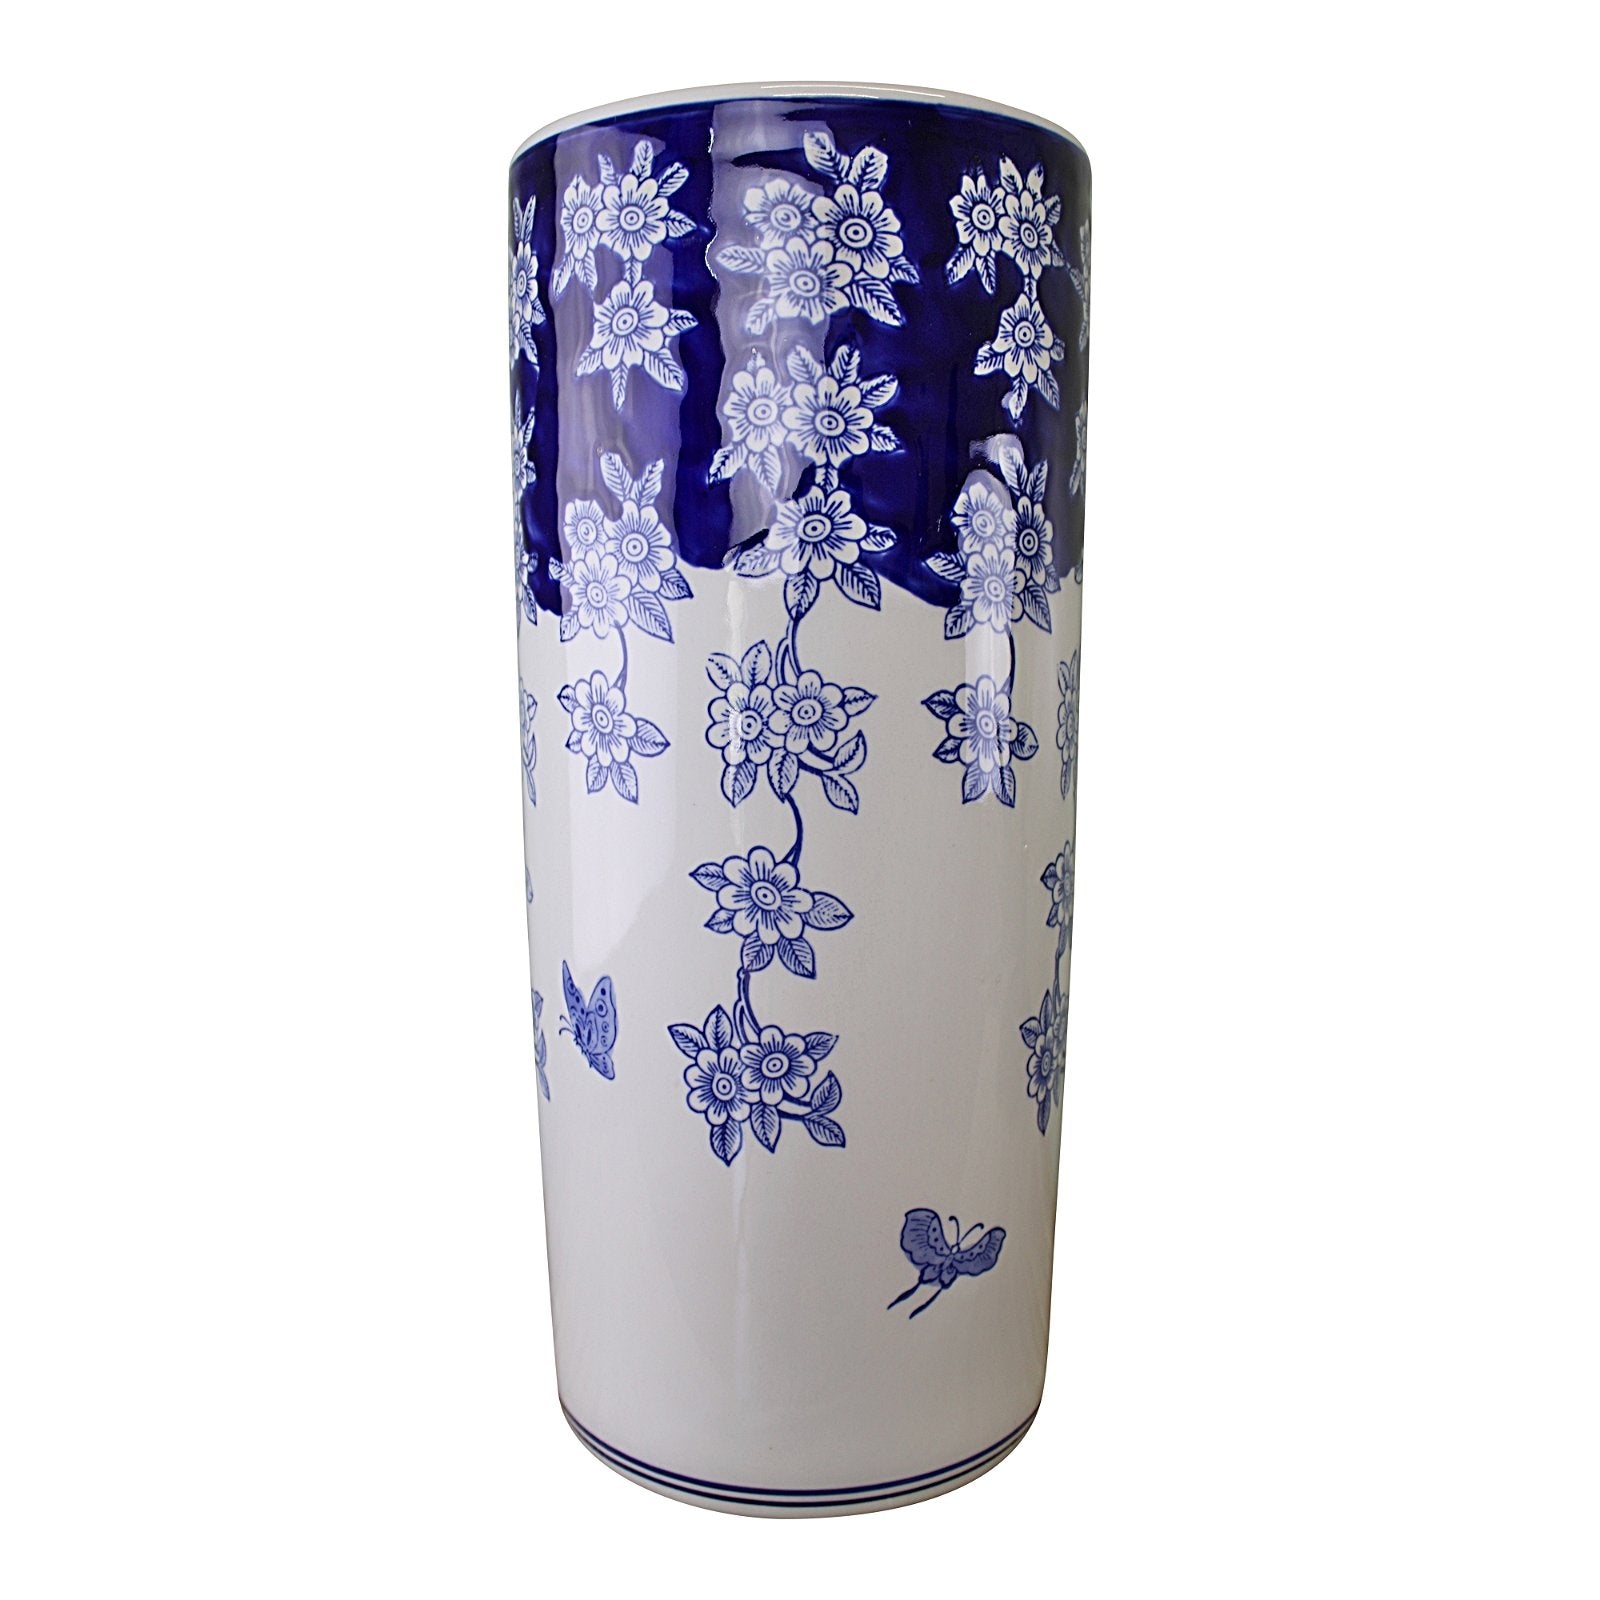 Umbrella Stand, Vintage Blue & White Flowers and Butterfly Design - Kaftan direct